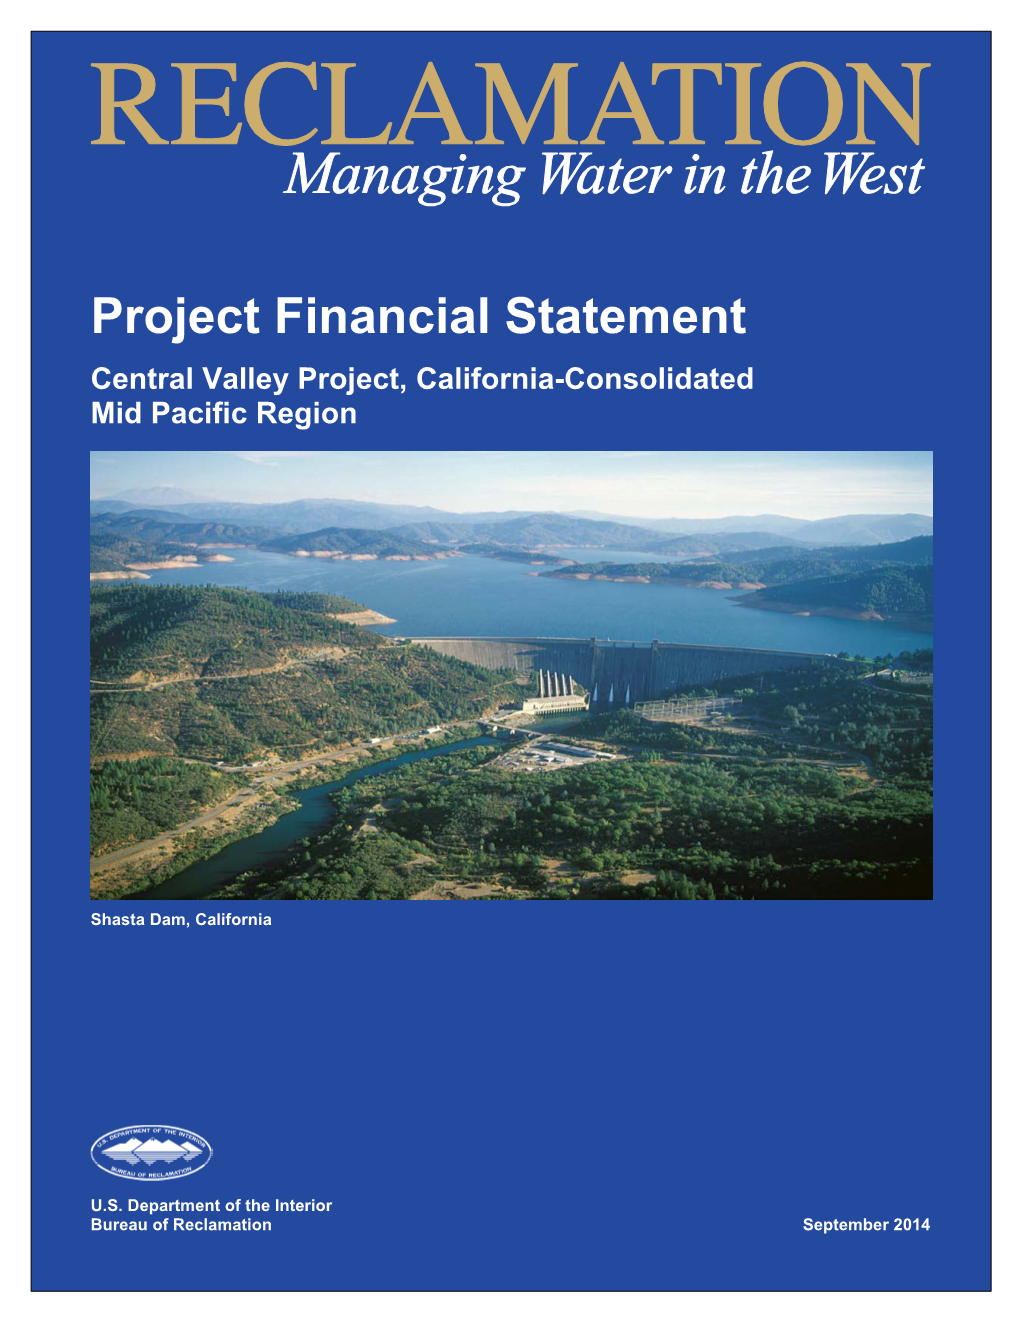 Project Financial Statement Central Valley Project, California-Consolidated Mid Pacific Region